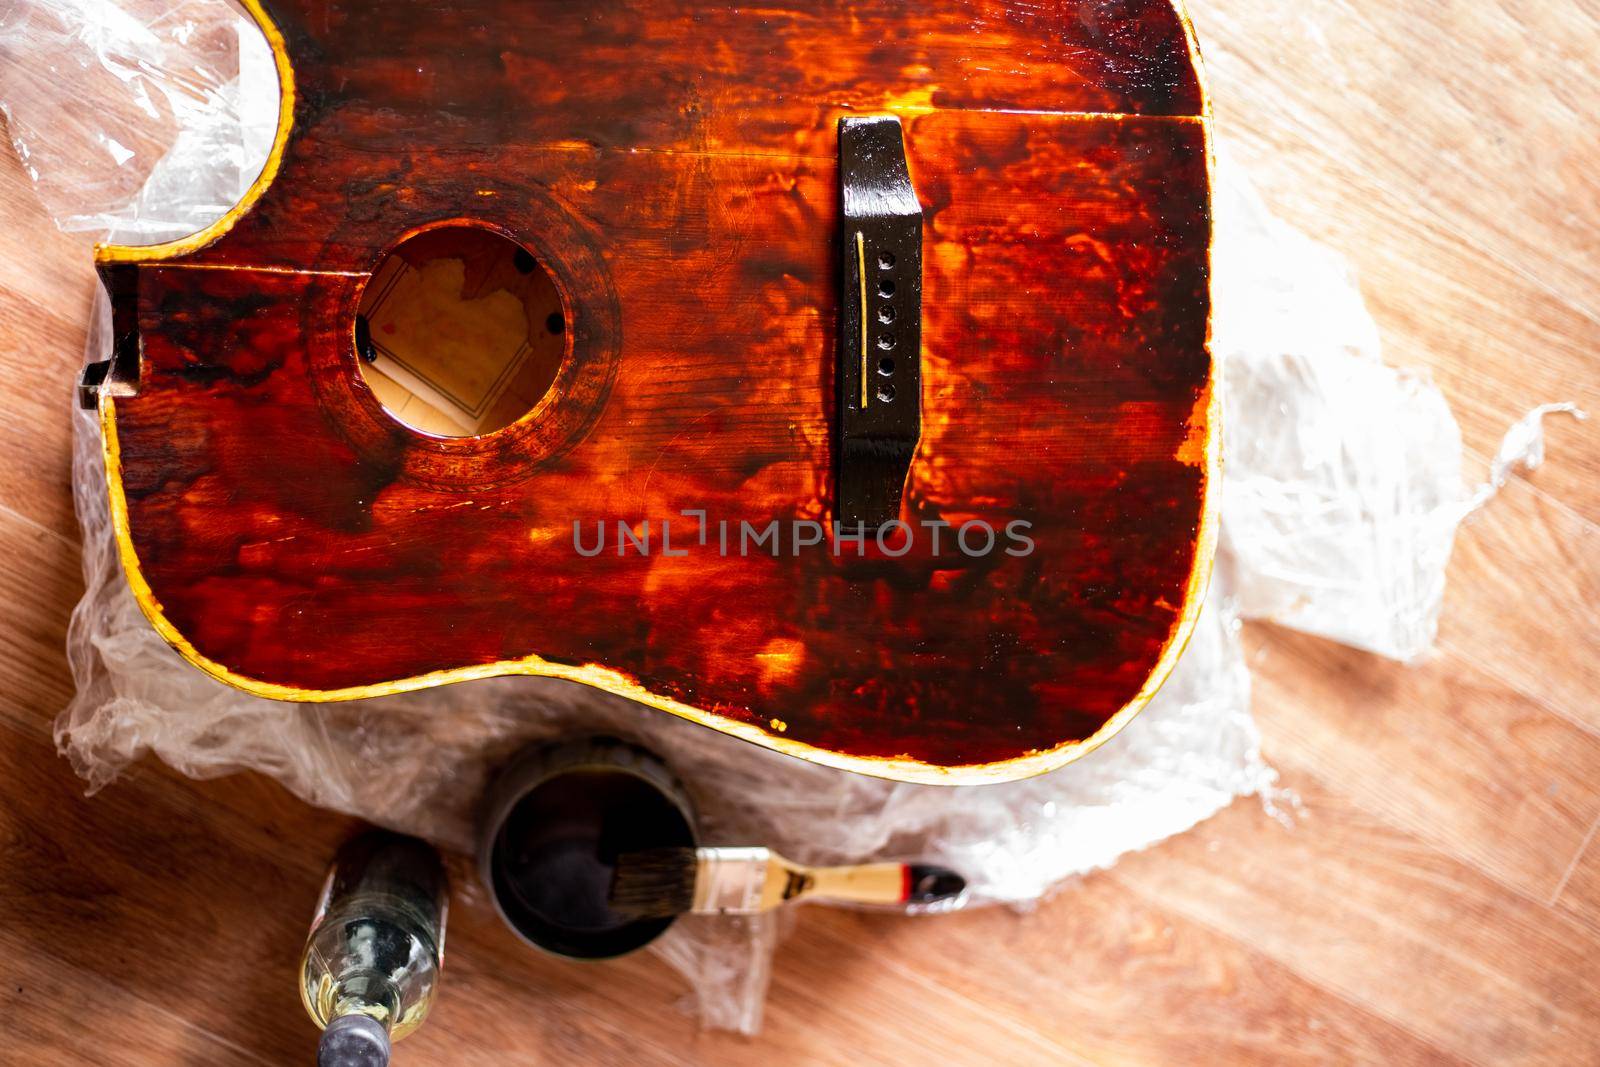 Painting an old guitar with varnish. Repair of vintage musical instruments.